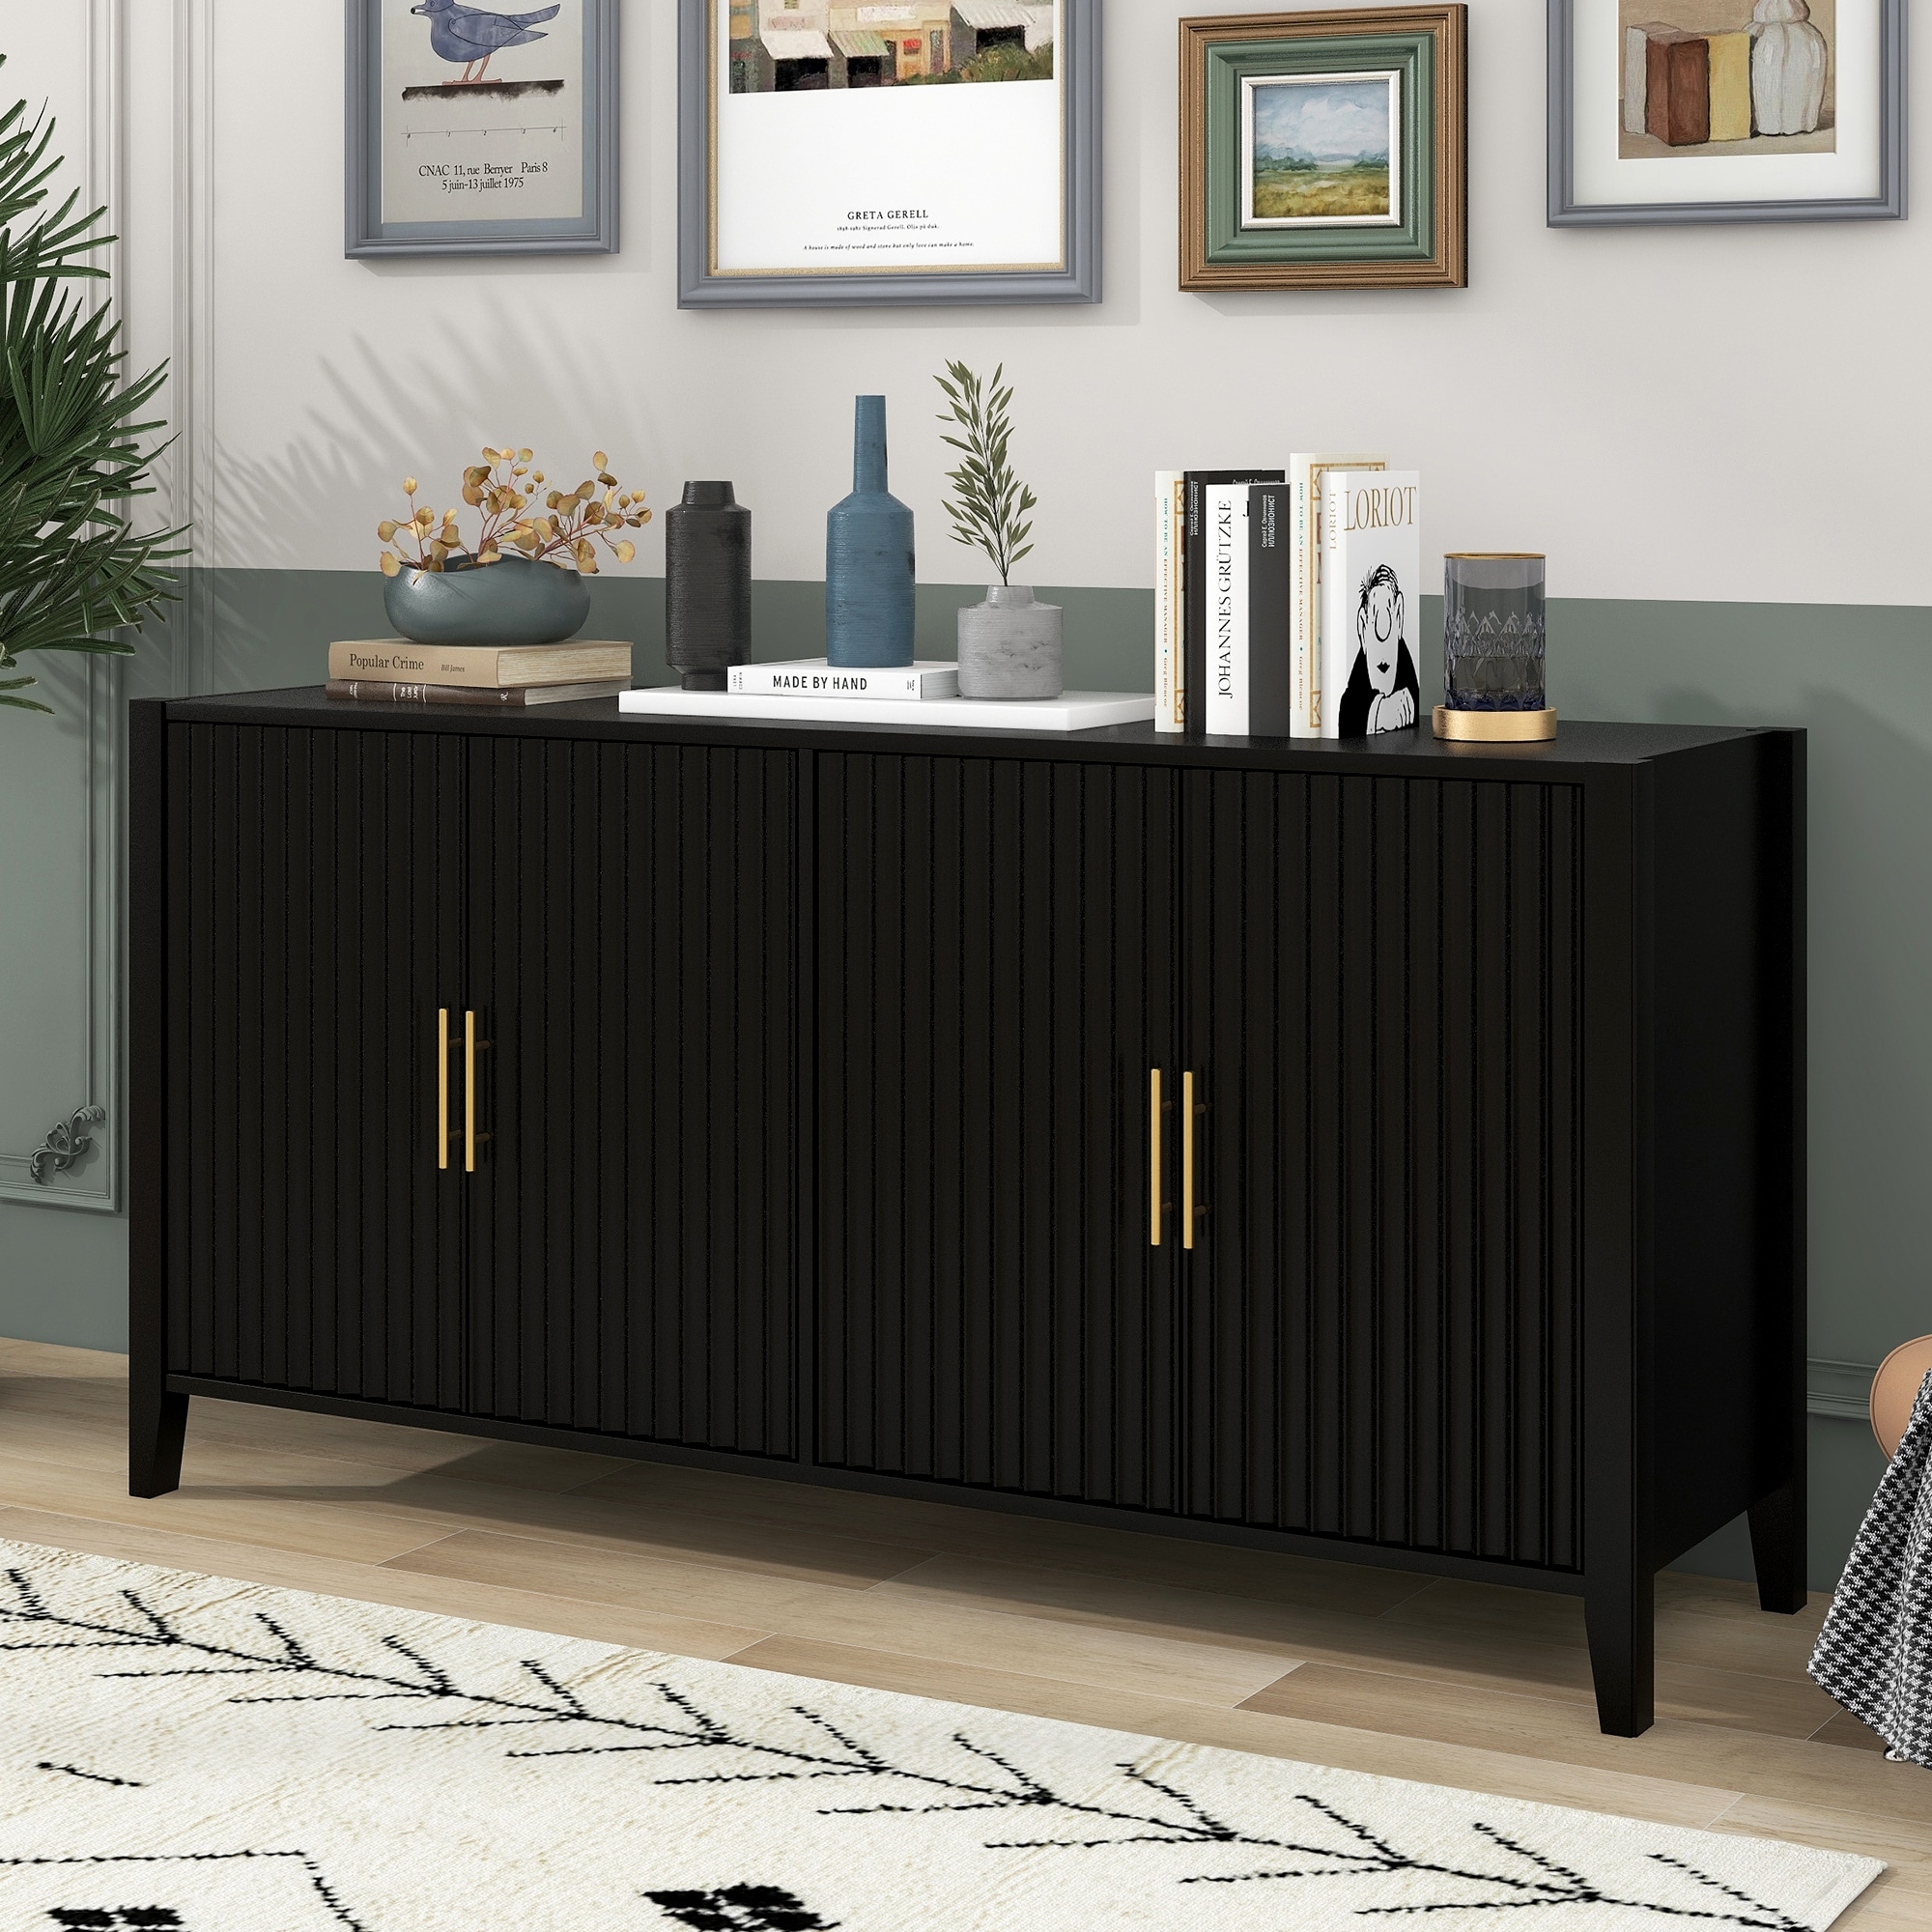 https://ak1.ostkcdn.com/images/products/is/images/direct/369a4c31e70d95a10ae2f92c1c135d3c48d06540/Hallway-Storage-Cabinet-Rectangular-Entryway-Console-Tables%2C-Black.jpg